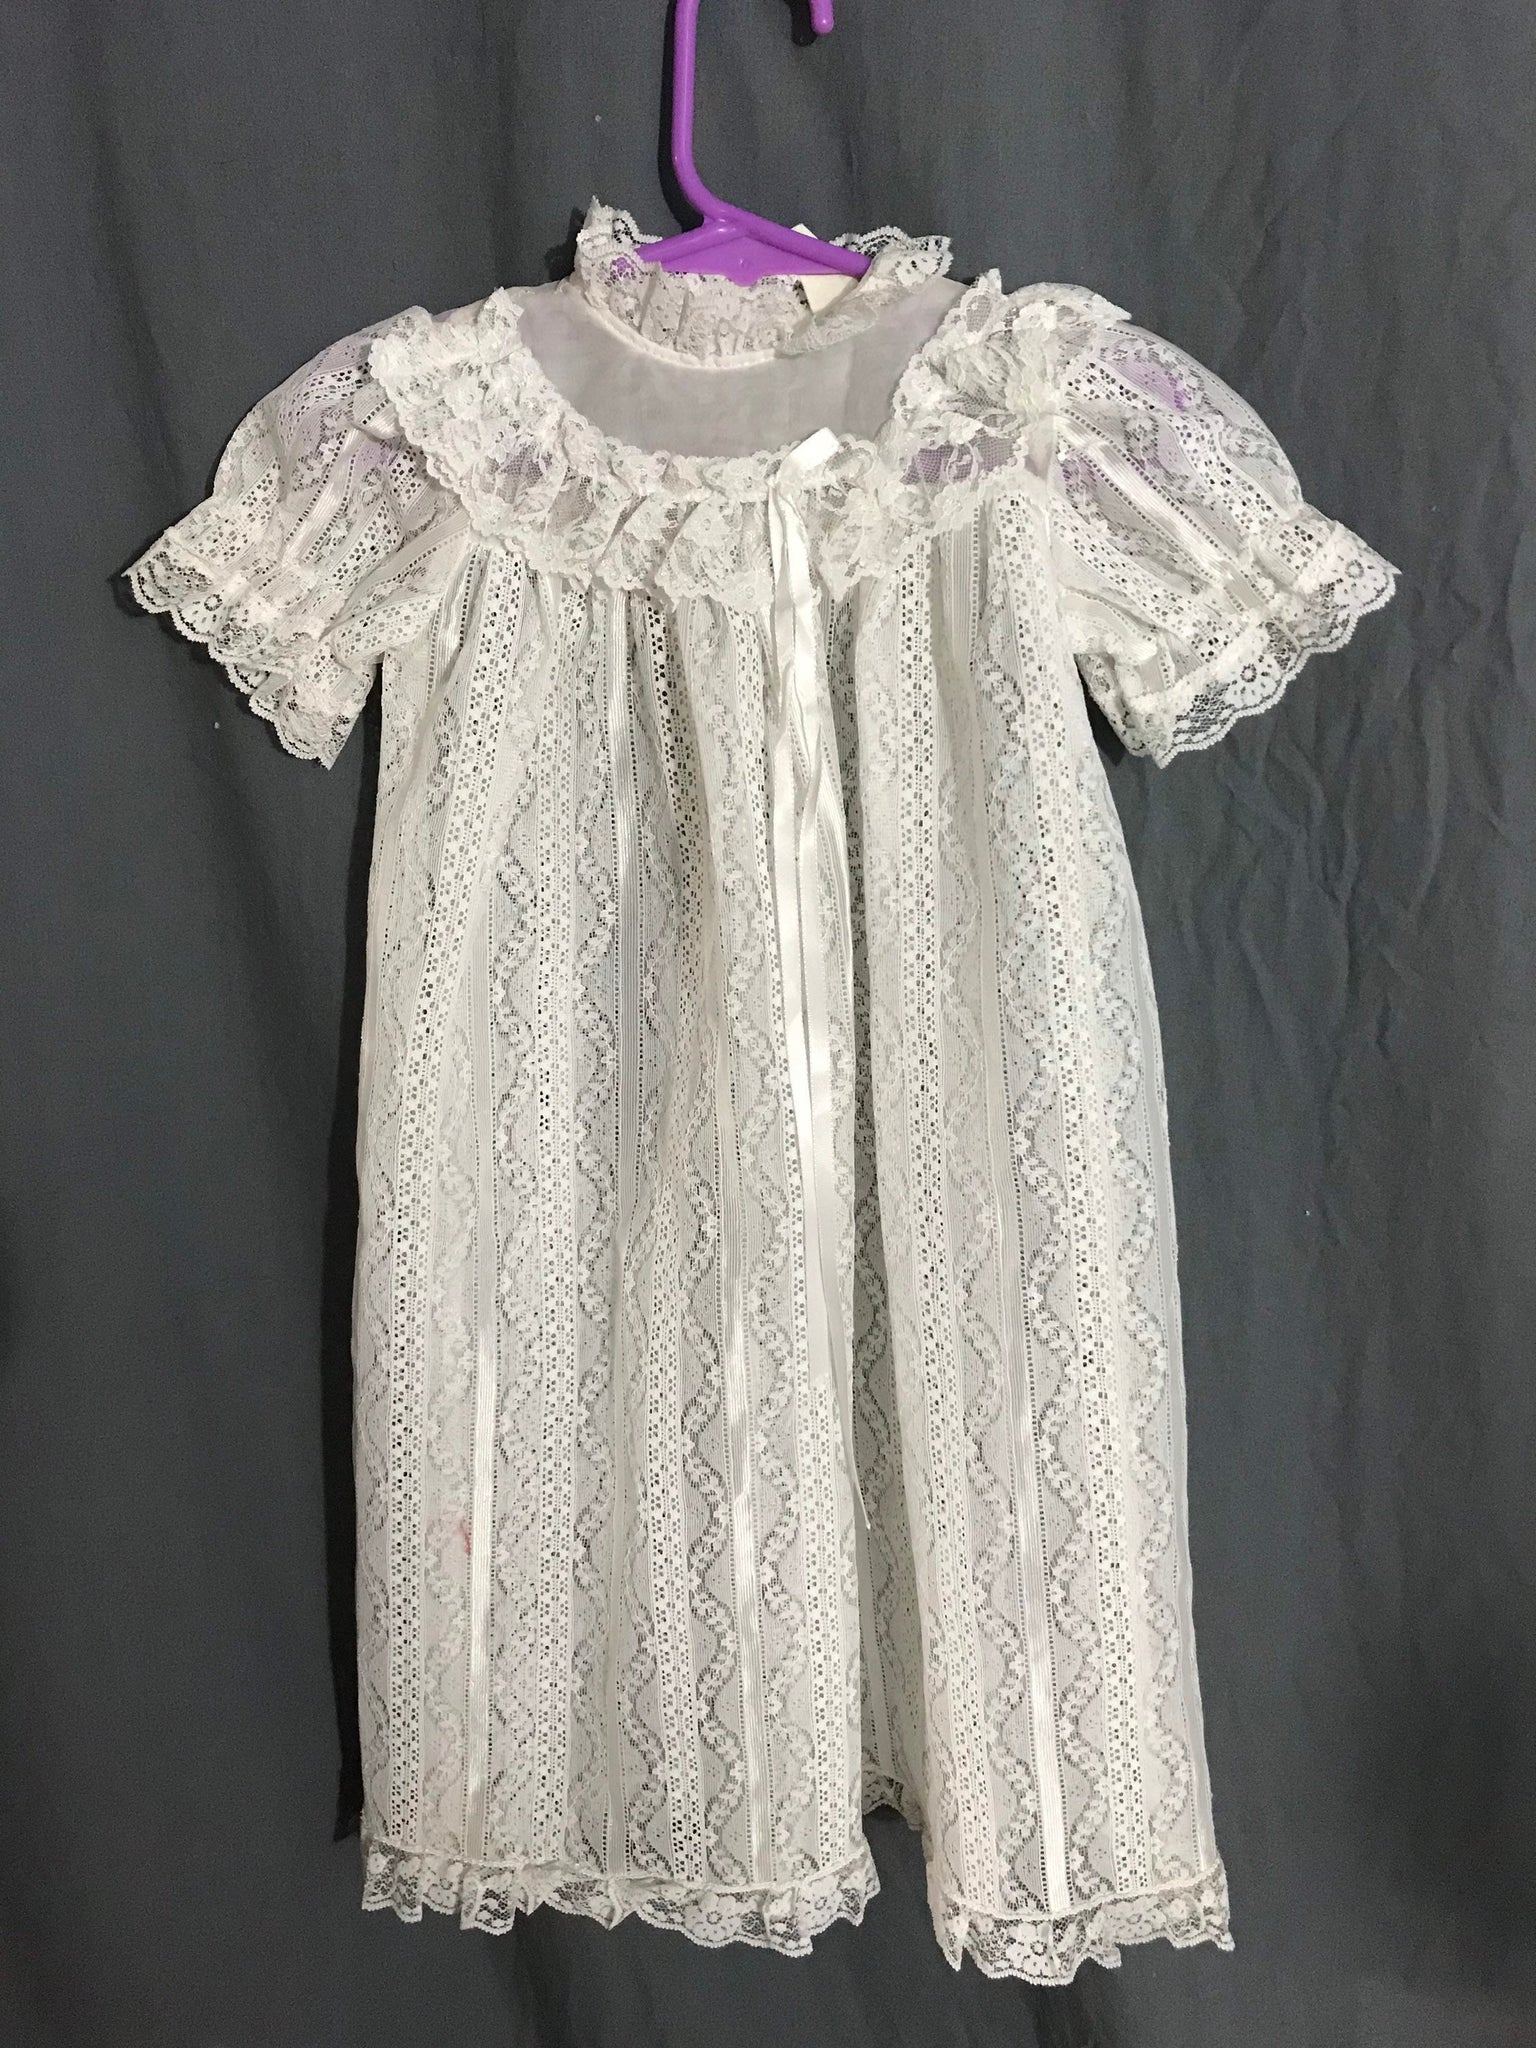 Vintage 1960’s 70’s white long lace baby dress 0-6 months